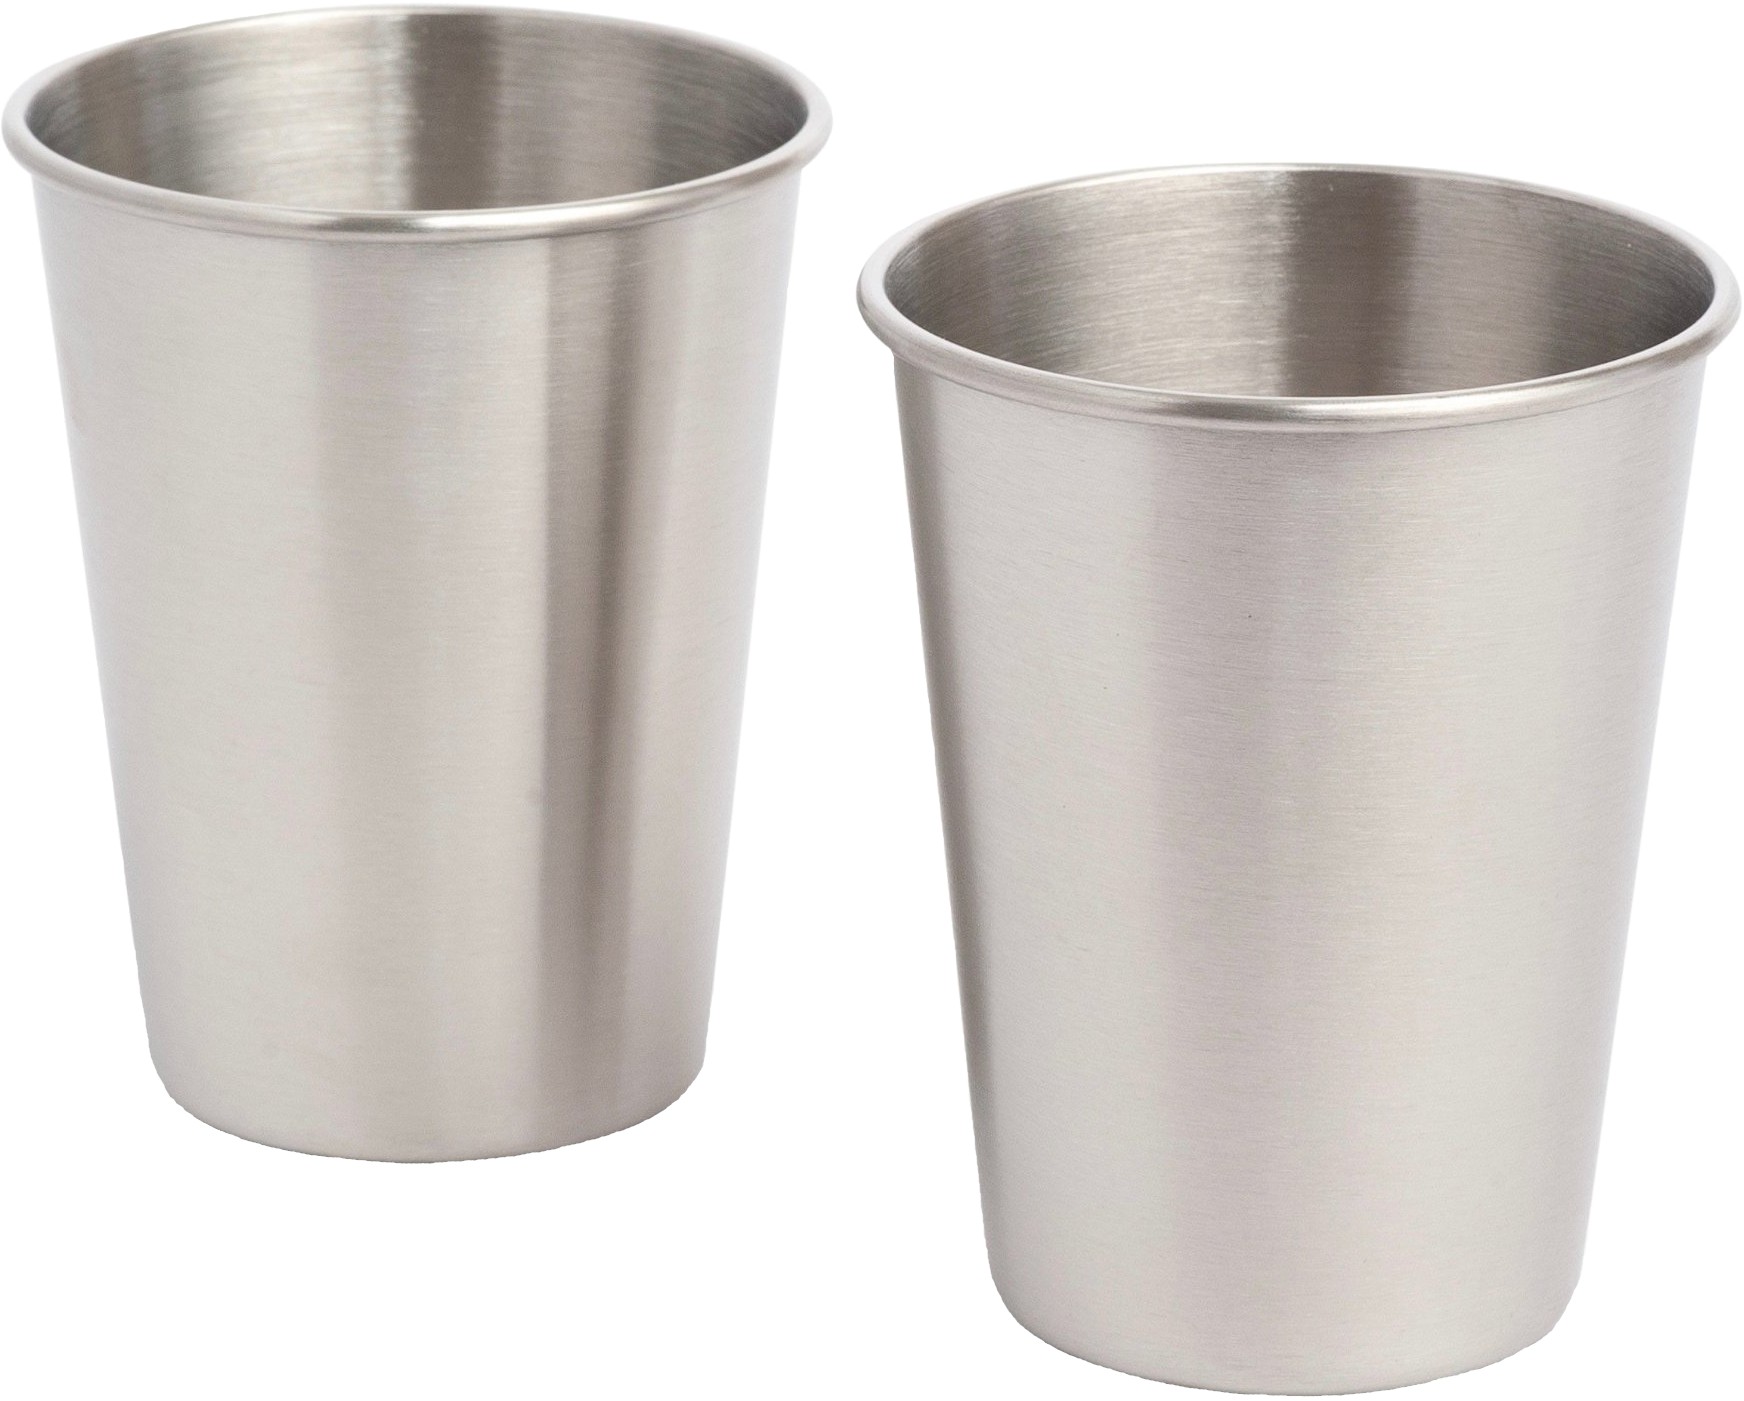 Elephant Box 350ml Stainless Steel Cup Durable Cup Set